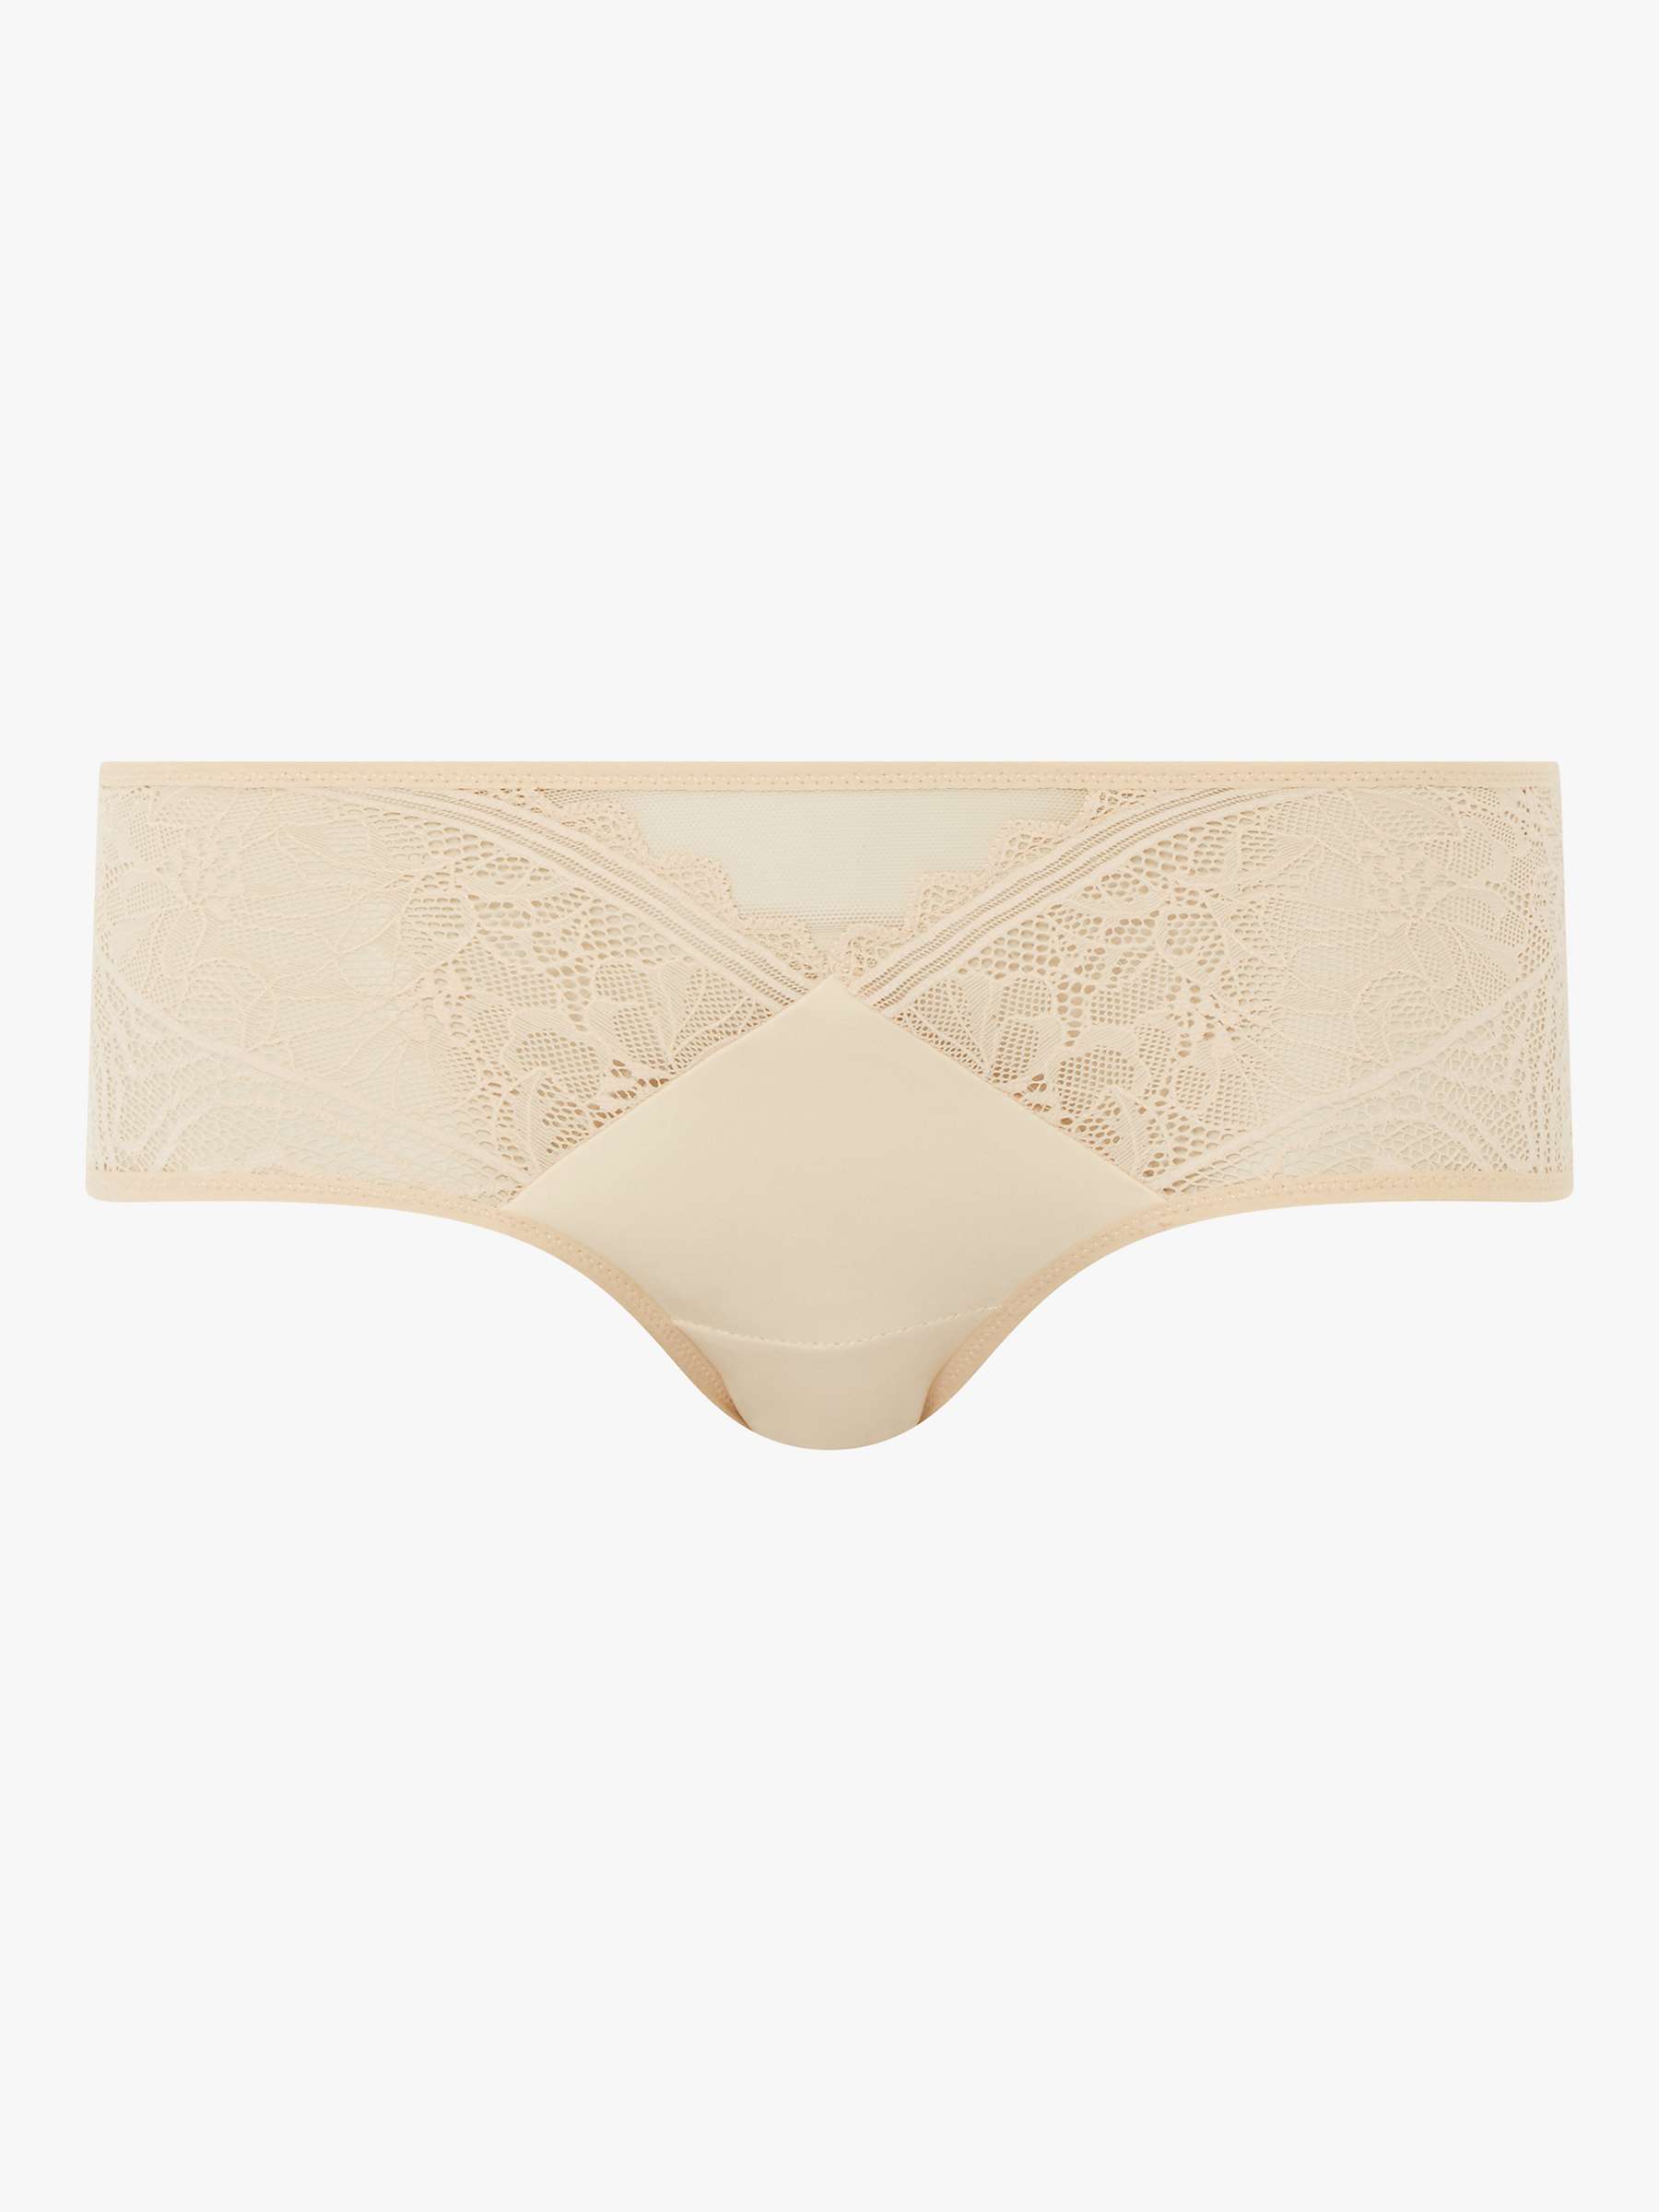 Buy Femilet Floral Touch Short Knickers Online at johnlewis.com